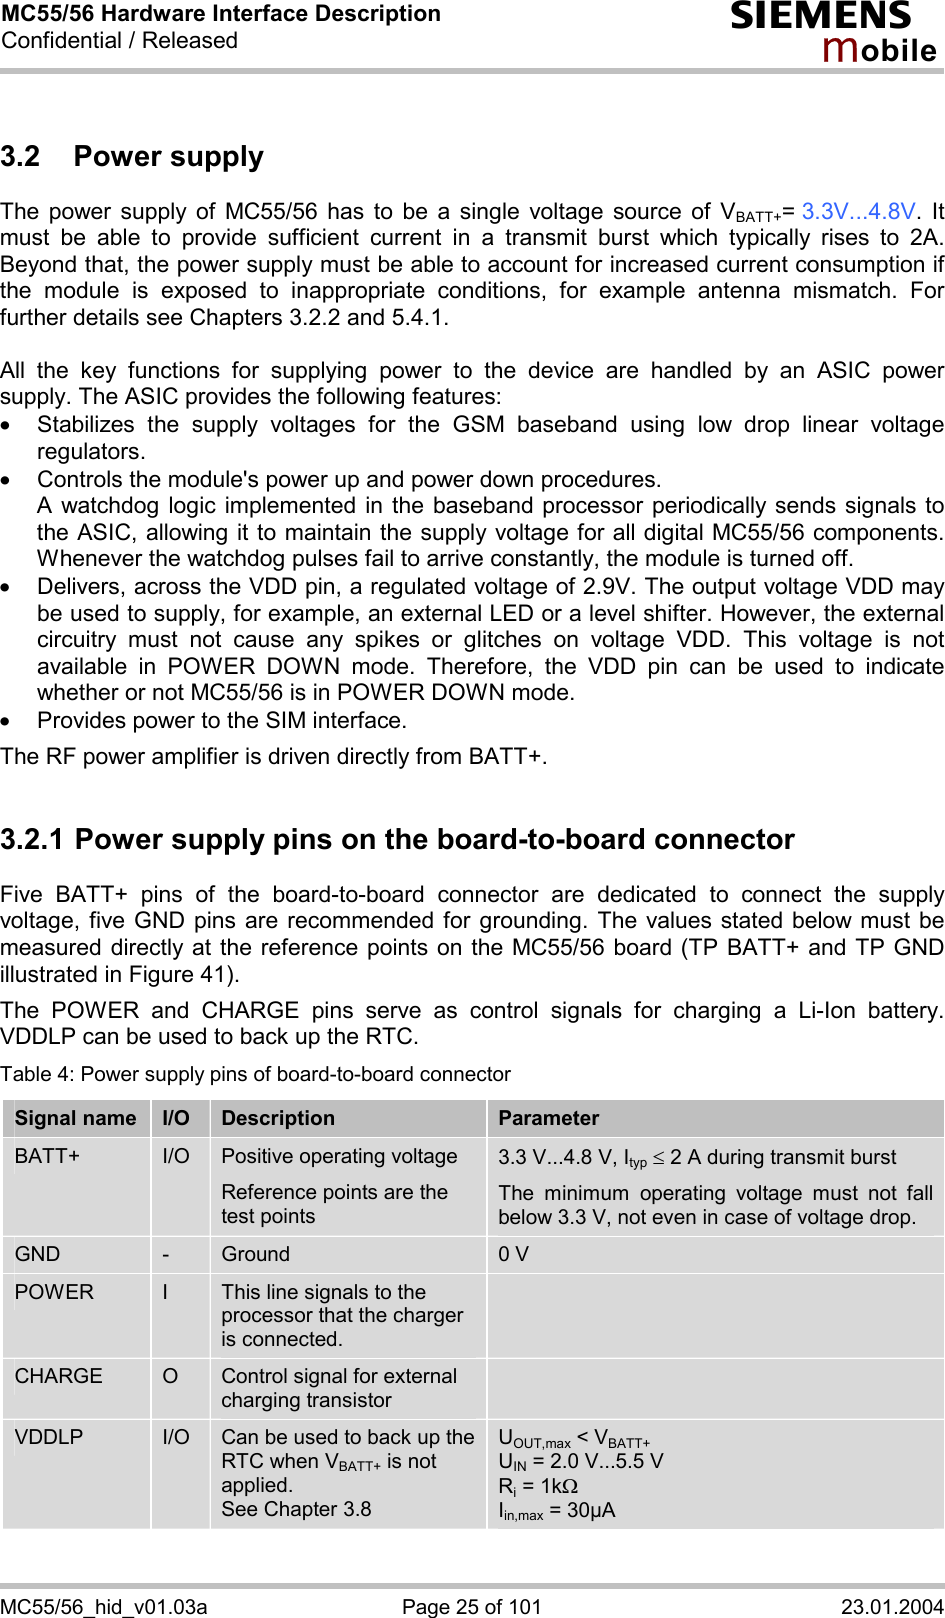 MC55/56 Hardware Interface Description Confidential / Released s mo b i l e MC55/56_hid_v01.03a  Page 25 of 101  23.01.2004 3.2 Power supply The power supply of MC55/56 has to be a single voltage source of VBATT+= 3.3V...4.8V. It must be able to provide sufficient current in a transmit burst which typically rises to 2A. Beyond that, the power supply must be able to account for increased current consumption if the module is exposed to inappropriate conditions, for example antenna mismatch. For further details see Chapters 3.2.2 and 5.4.1.  All the key functions for supplying power to the device are handled by an ASIC power supply. The ASIC provides the following features: ·  Stabilizes the supply voltages for the GSM baseband using low drop linear voltage regulators.  ·  Controls the module&apos;s power up and power down procedures.  A watchdog logic implemented in the baseband processor periodically sends signals to the ASIC, allowing it to maintain the supply voltage for all digital MC55/56 components. Whenever the watchdog pulses fail to arrive constantly, the module is turned off.  ·  Delivers, across the VDD pin, a regulated voltage of 2.9V. The output voltage VDD may be used to supply, for example, an external LED or a level shifter. However, the external circuitry must not cause any spikes or glitches on voltage VDD. This voltage is not available in POWER DOWN mode. Therefore, the VDD pin can be used to indicate whether or not MC55/56 is in POWER DOWN mode. ·  Provides power to the SIM interface.  The RF power amplifier is driven directly from BATT+.  3.2.1 Power supply pins on the board-to-board connector Five BATT+ pins of the board-to-board connector are dedicated to connect the supply voltage, five GND pins are recommended for grounding. The values stated below must be measured directly at the reference points on the MC55/56 board (TP BATT+ and TP GND illustrated in Figure 41).  The POWER and CHARGE pins serve as control signals for charging a Li-Ion battery. VDDLP can be used to back up the RTC.  Table 4: Power supply pins of board-to-board connector Signal name  I/O  Description  Parameter BATT+  I/O  Positive operating voltage Reference points are the test points  3.3 V...4.8 V, Ityp £ 2 A during transmit burst The minimum operating voltage must not fall below 3.3 V, not even in case of voltage drop. GND  -  Ground  0 V POWER  I  This line signals to the processor that the charger is connected.  CHARGE  O  Control signal for external charging transistor  VDDLP  I/O  Can be used to back up the RTC when VBATT+ is not applied.  See Chapter 3.8 UOUT,max &lt; VBATT+ UIN = 2.0 V...5.5 V Ri = 1kW Iin,max = 30µA  